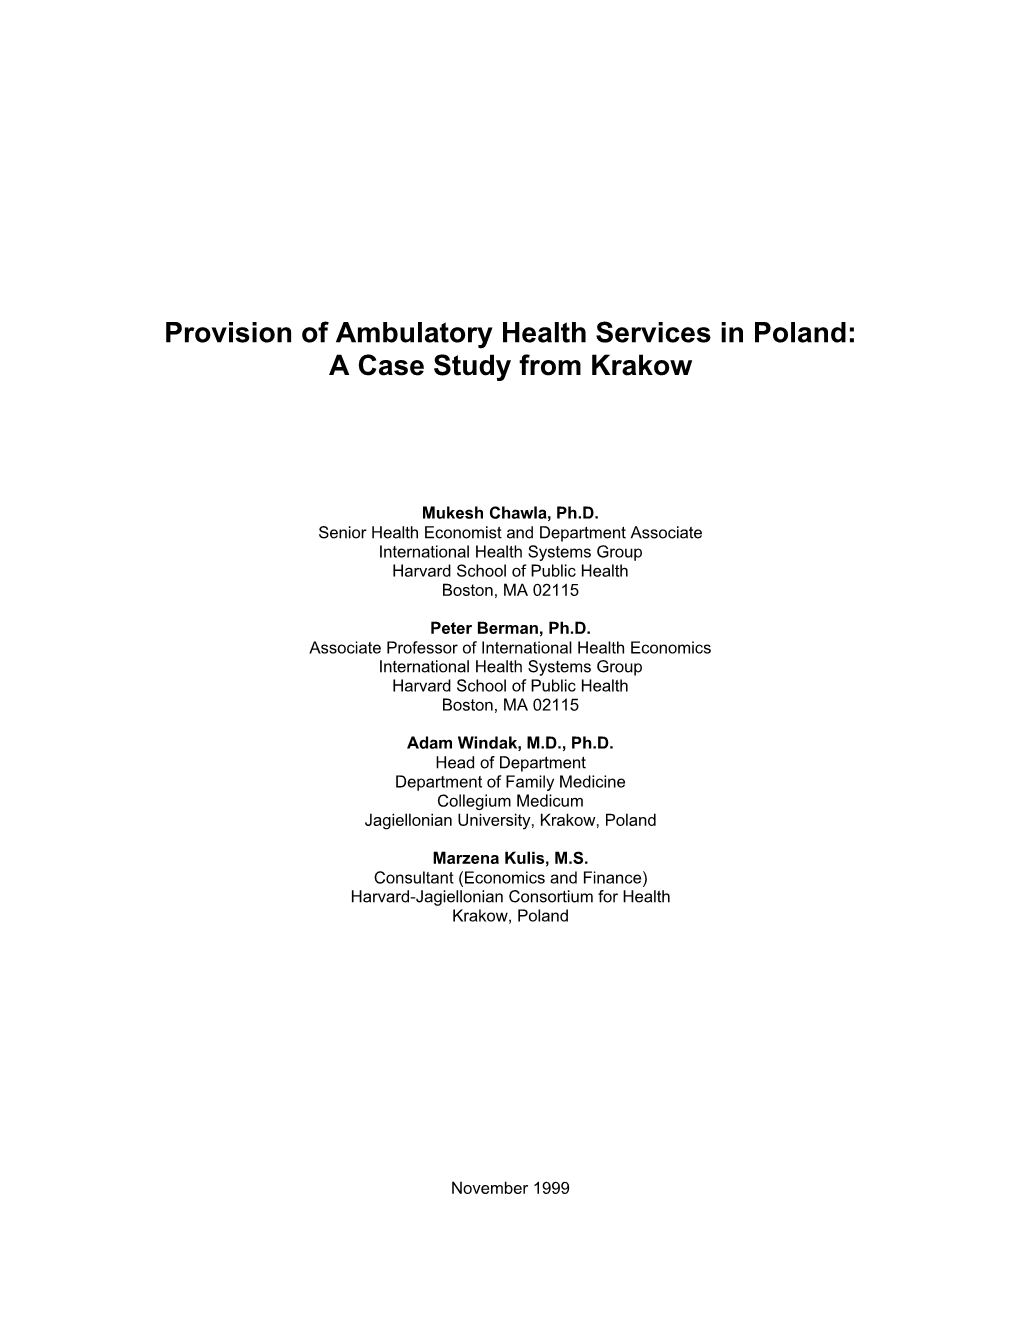 Provision of Ambulatory Health Services in Poland: a Case Study from Krakow